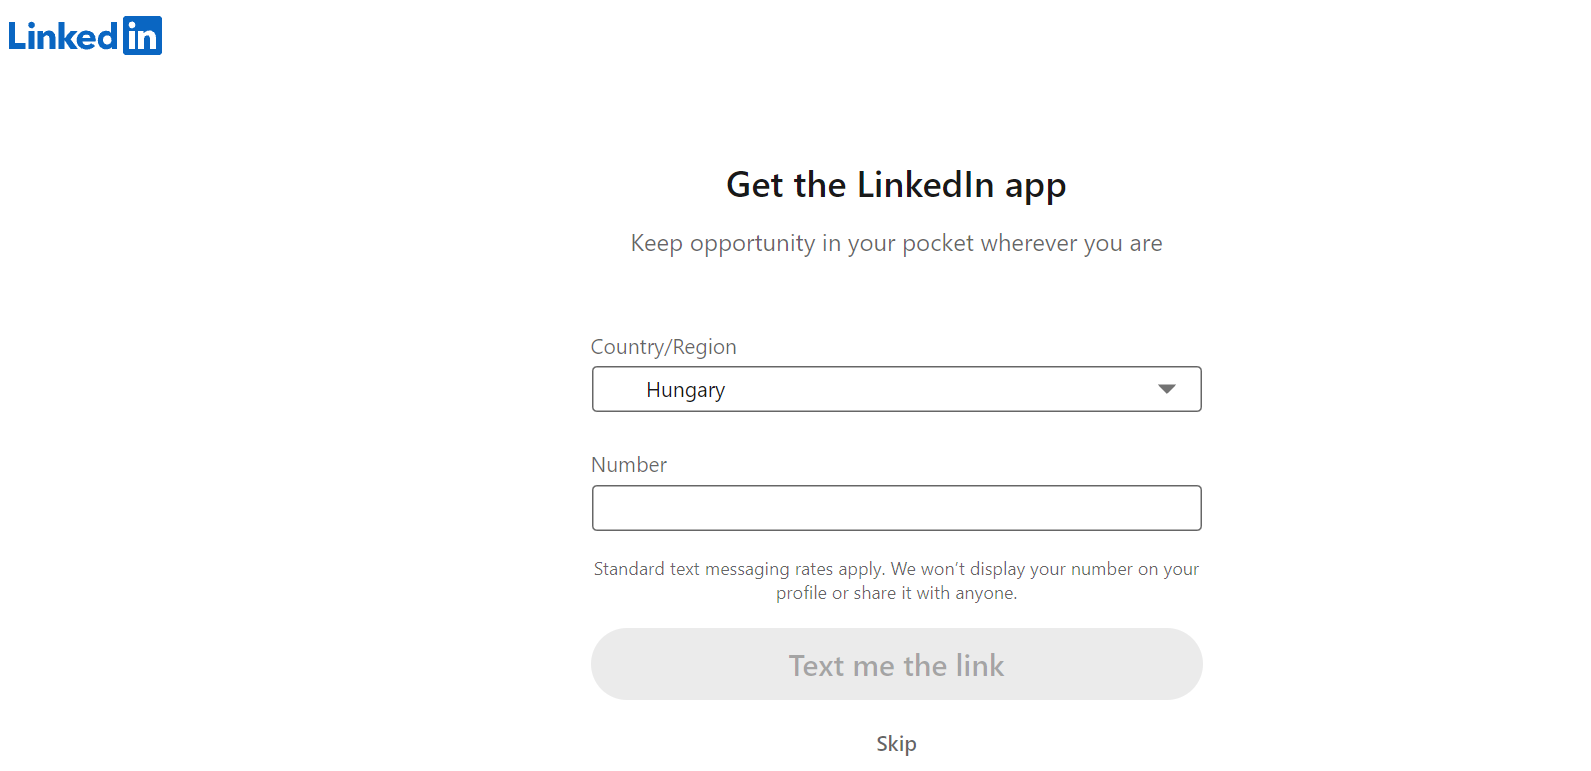 How to create LinkedIn profile - download the app